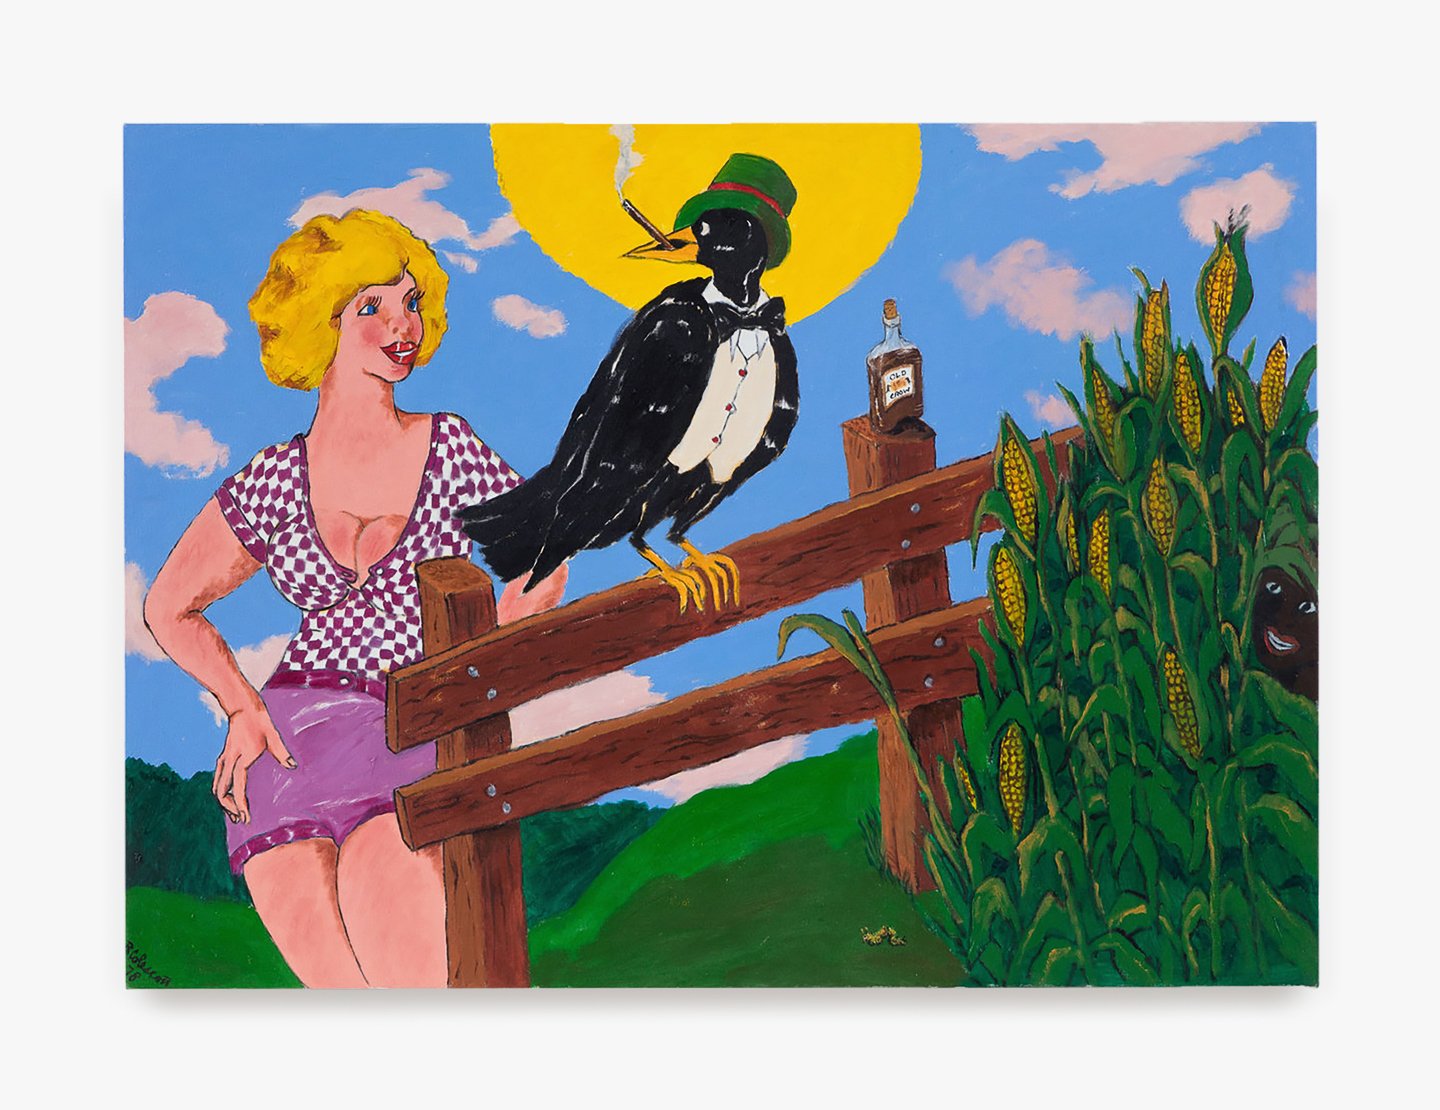  Robert Colescott,  Old Crow on the Fence , 1978. Acrylic on canvas; 48 x 66 in (121.92 x 167.64 cm). Private Collection. © The Robert H. Colescott Separate Property Trust / Artists Rights Society (ARS), New York. Courtesy Venus Over Manhattan, New Y